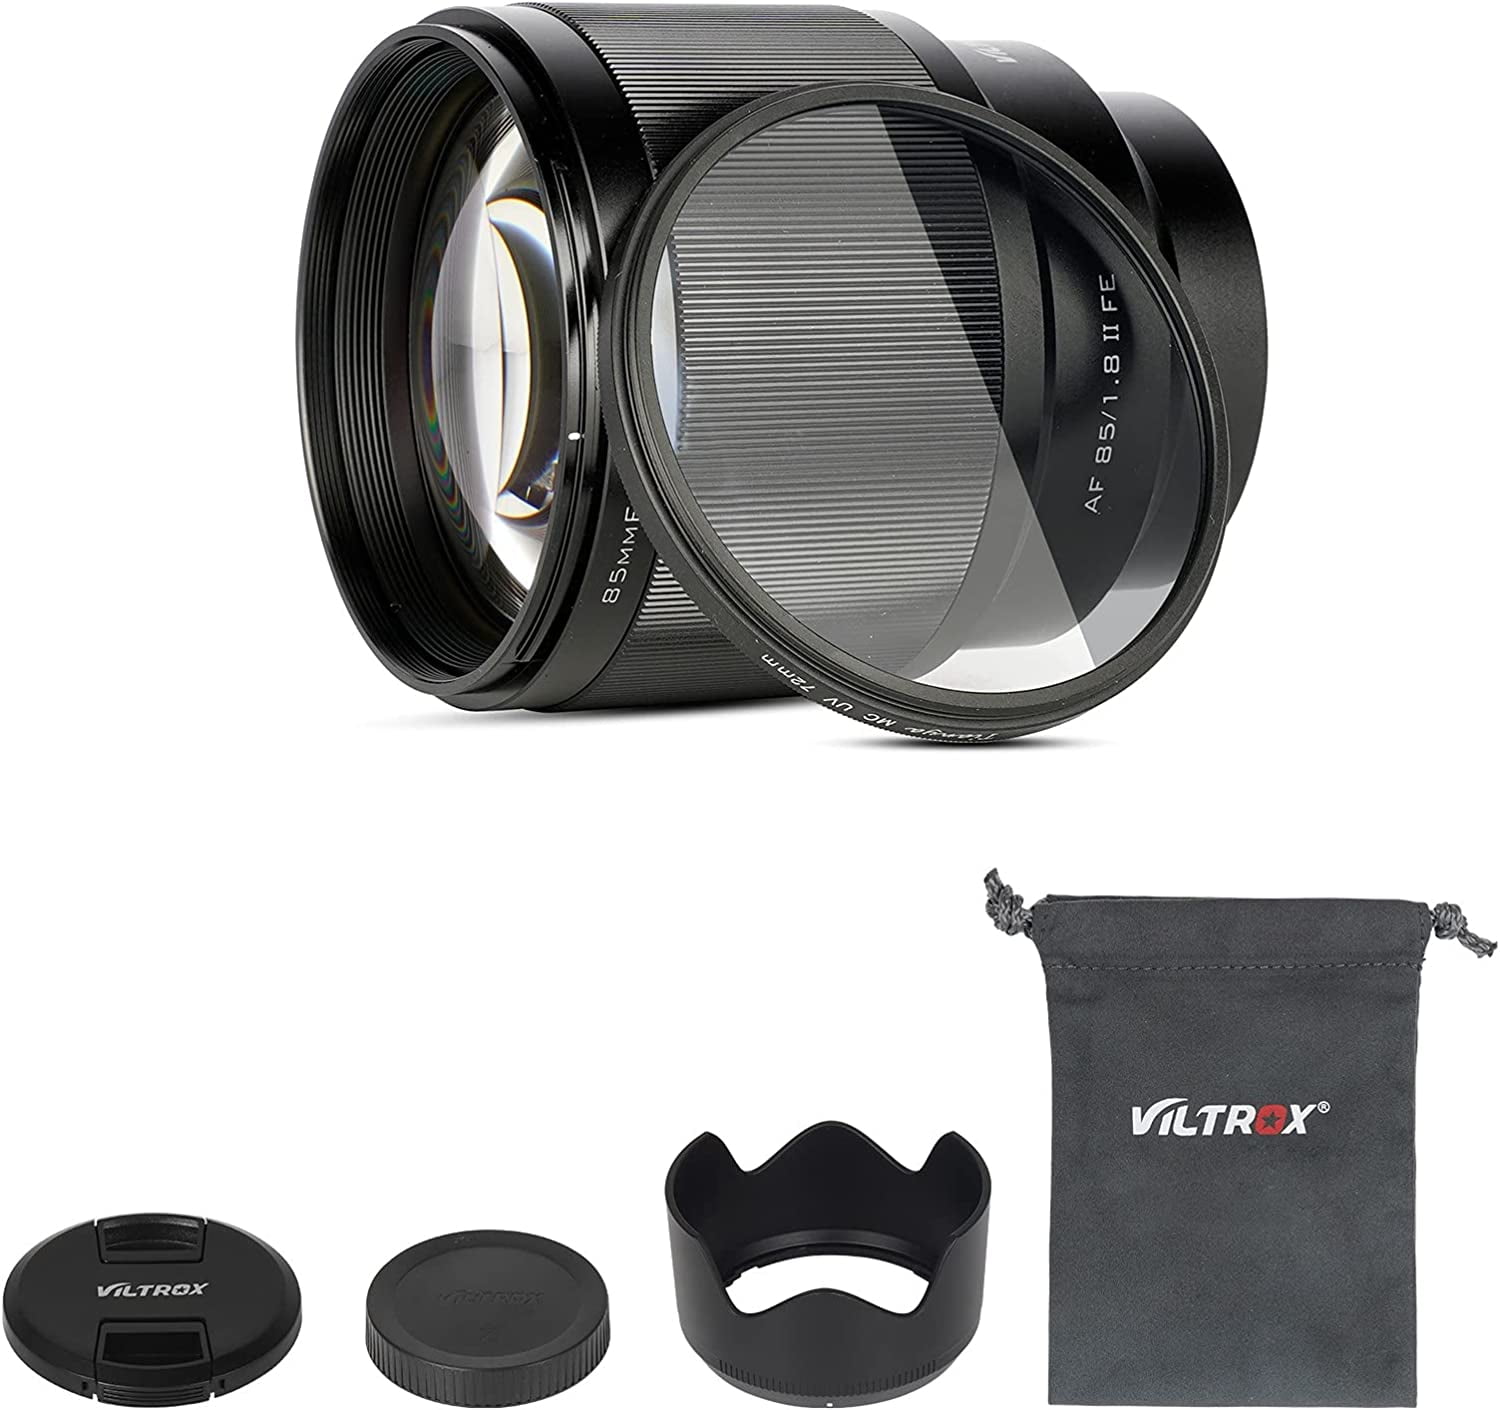 VILTROX 85mm f/1.8 F1.8 Mark II Full-Frame E-Mount Camera Lens Support AF  Auto Focus for Sony A7II A7III A7RIII A7SIII A7II A7RIV A9 A6600 A6500  A6400 A6300 A6100 A6000 A5100 A5000 A7C